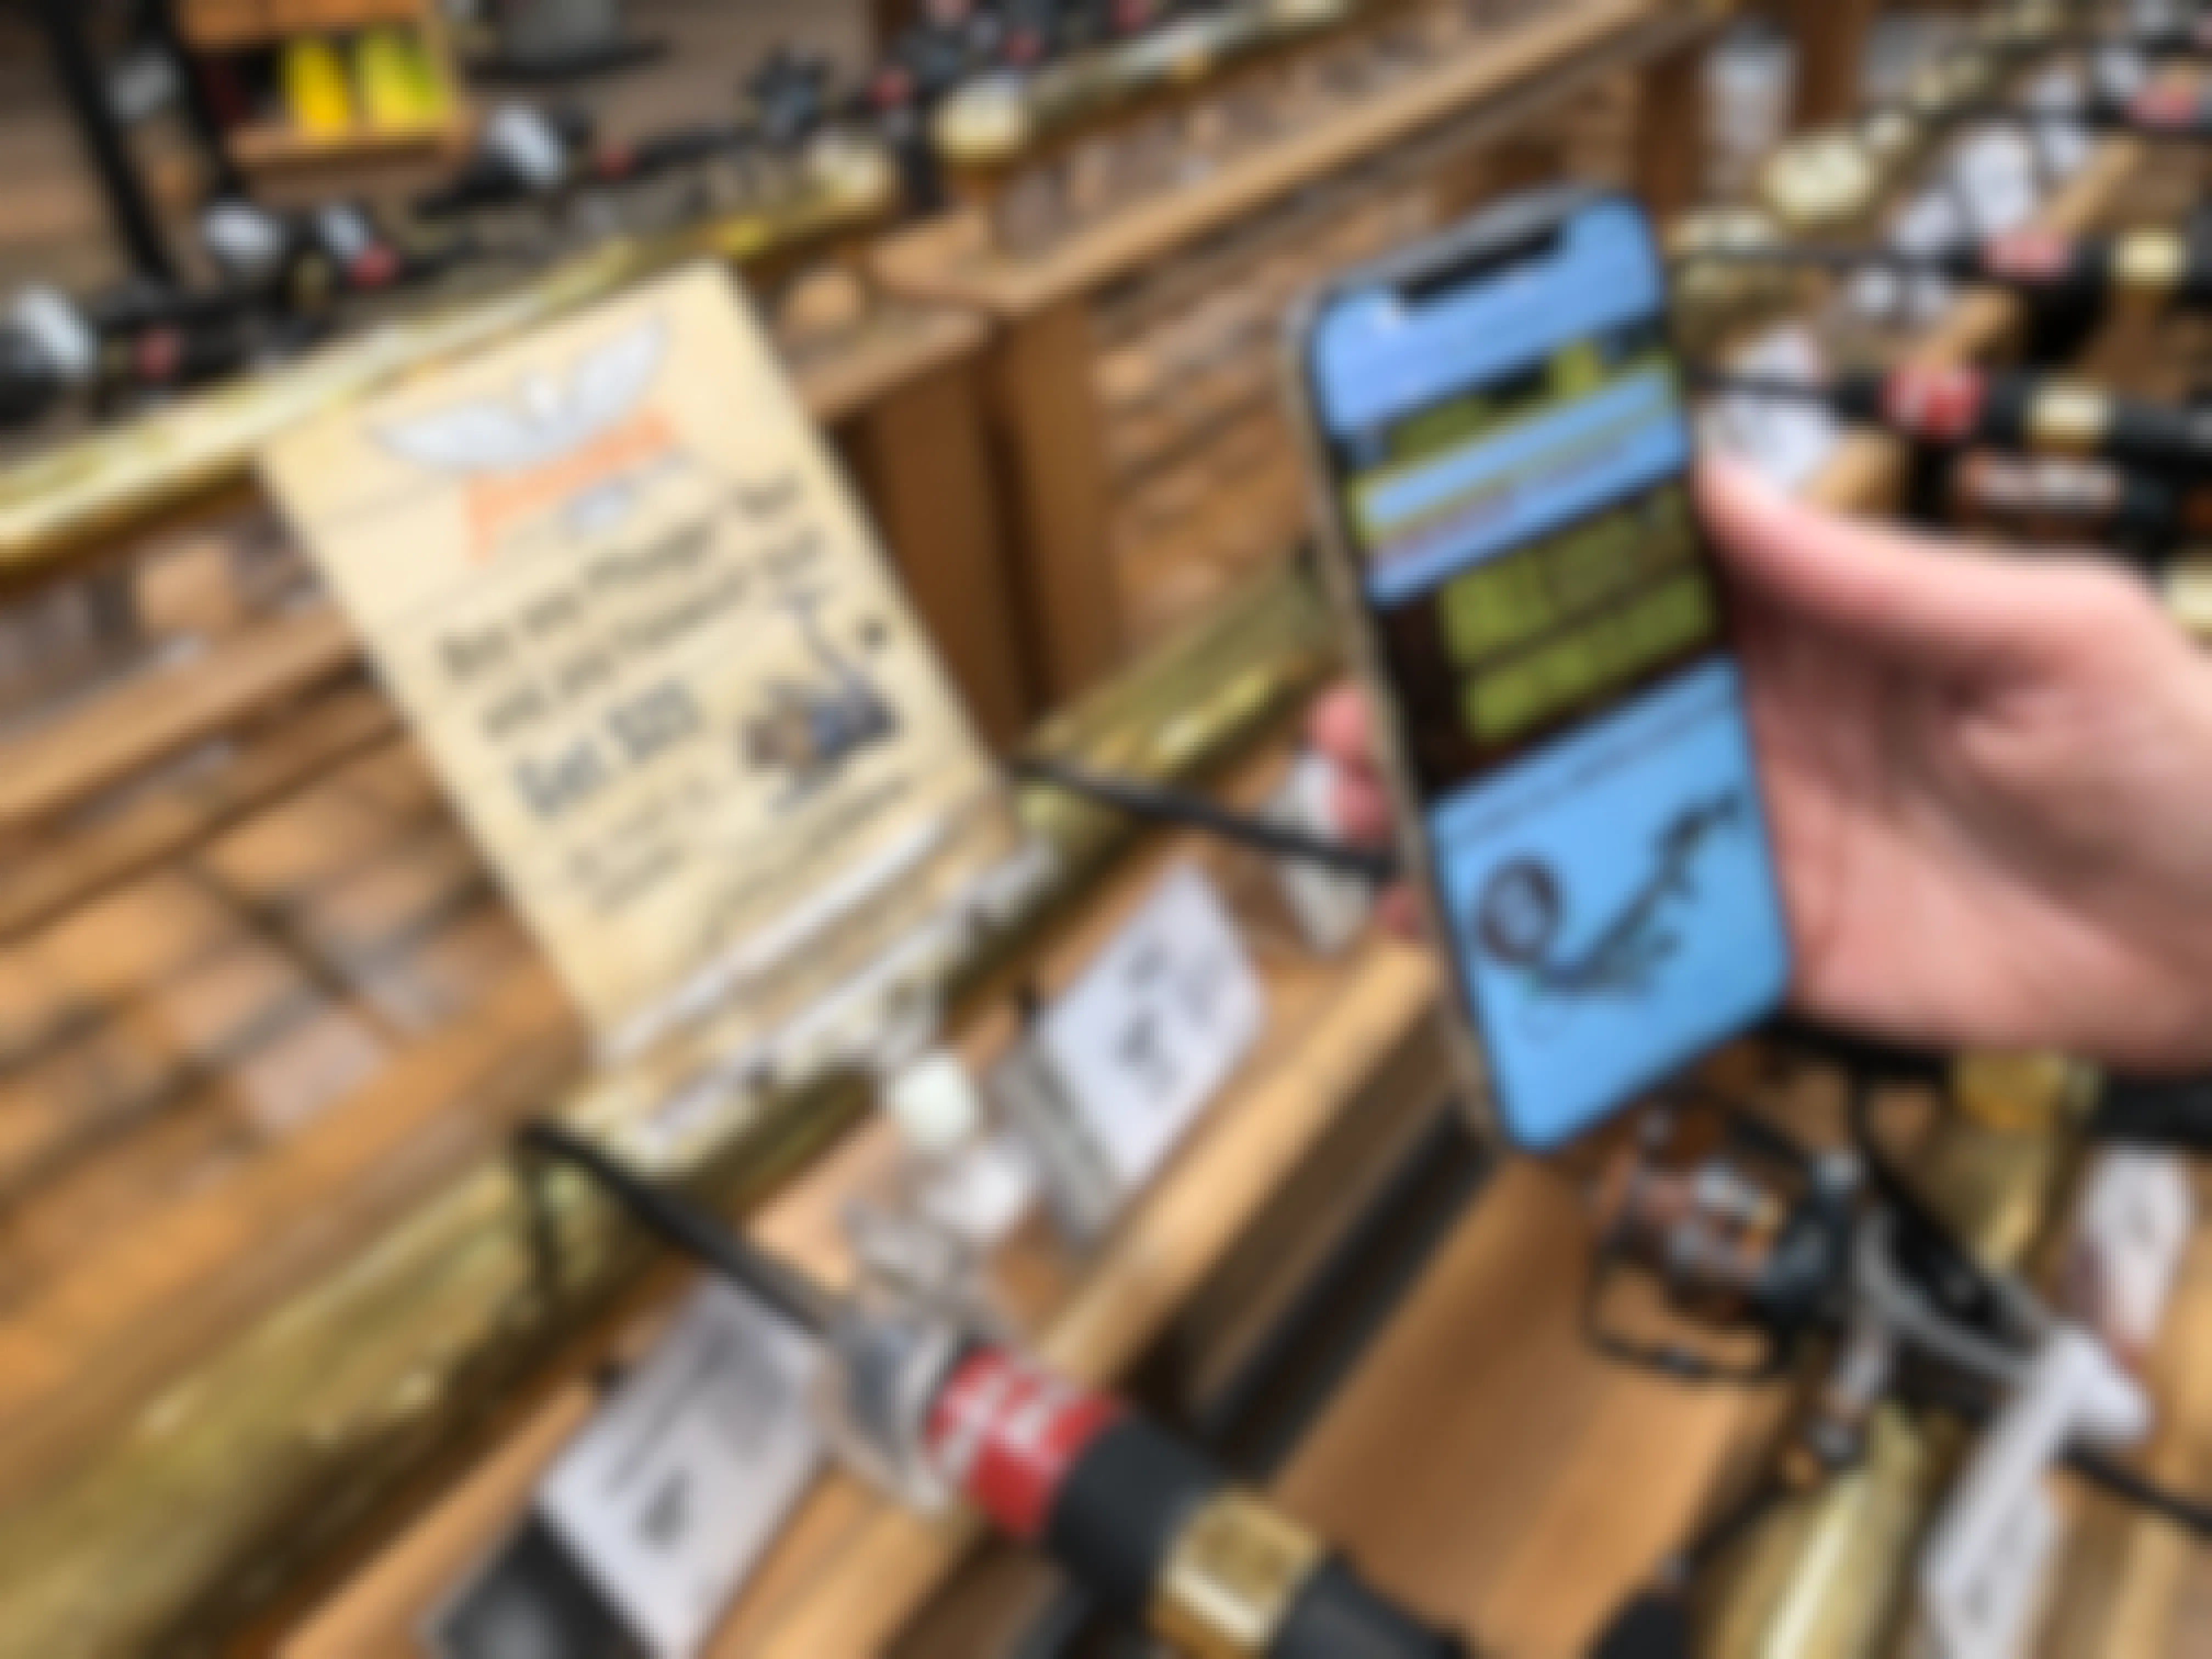 A person's hand holding their cellphone, with the Cabela's site open, in front of a display of fishing rods.